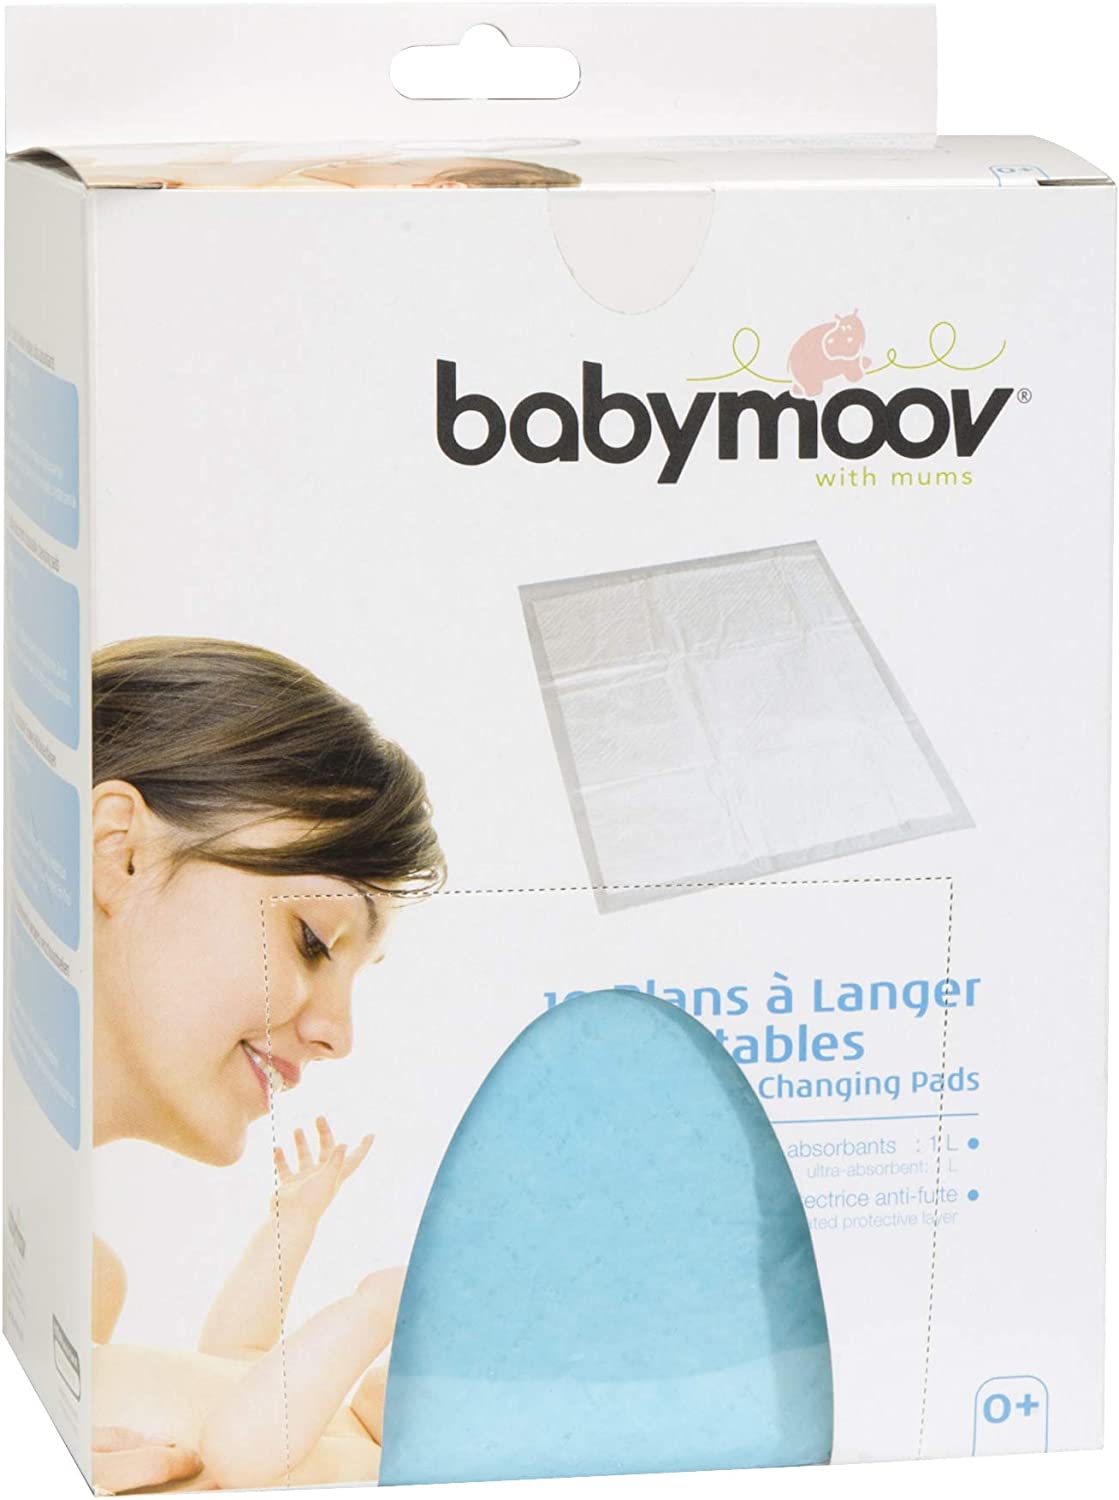 Disposable Changing Pad by Babymoov.